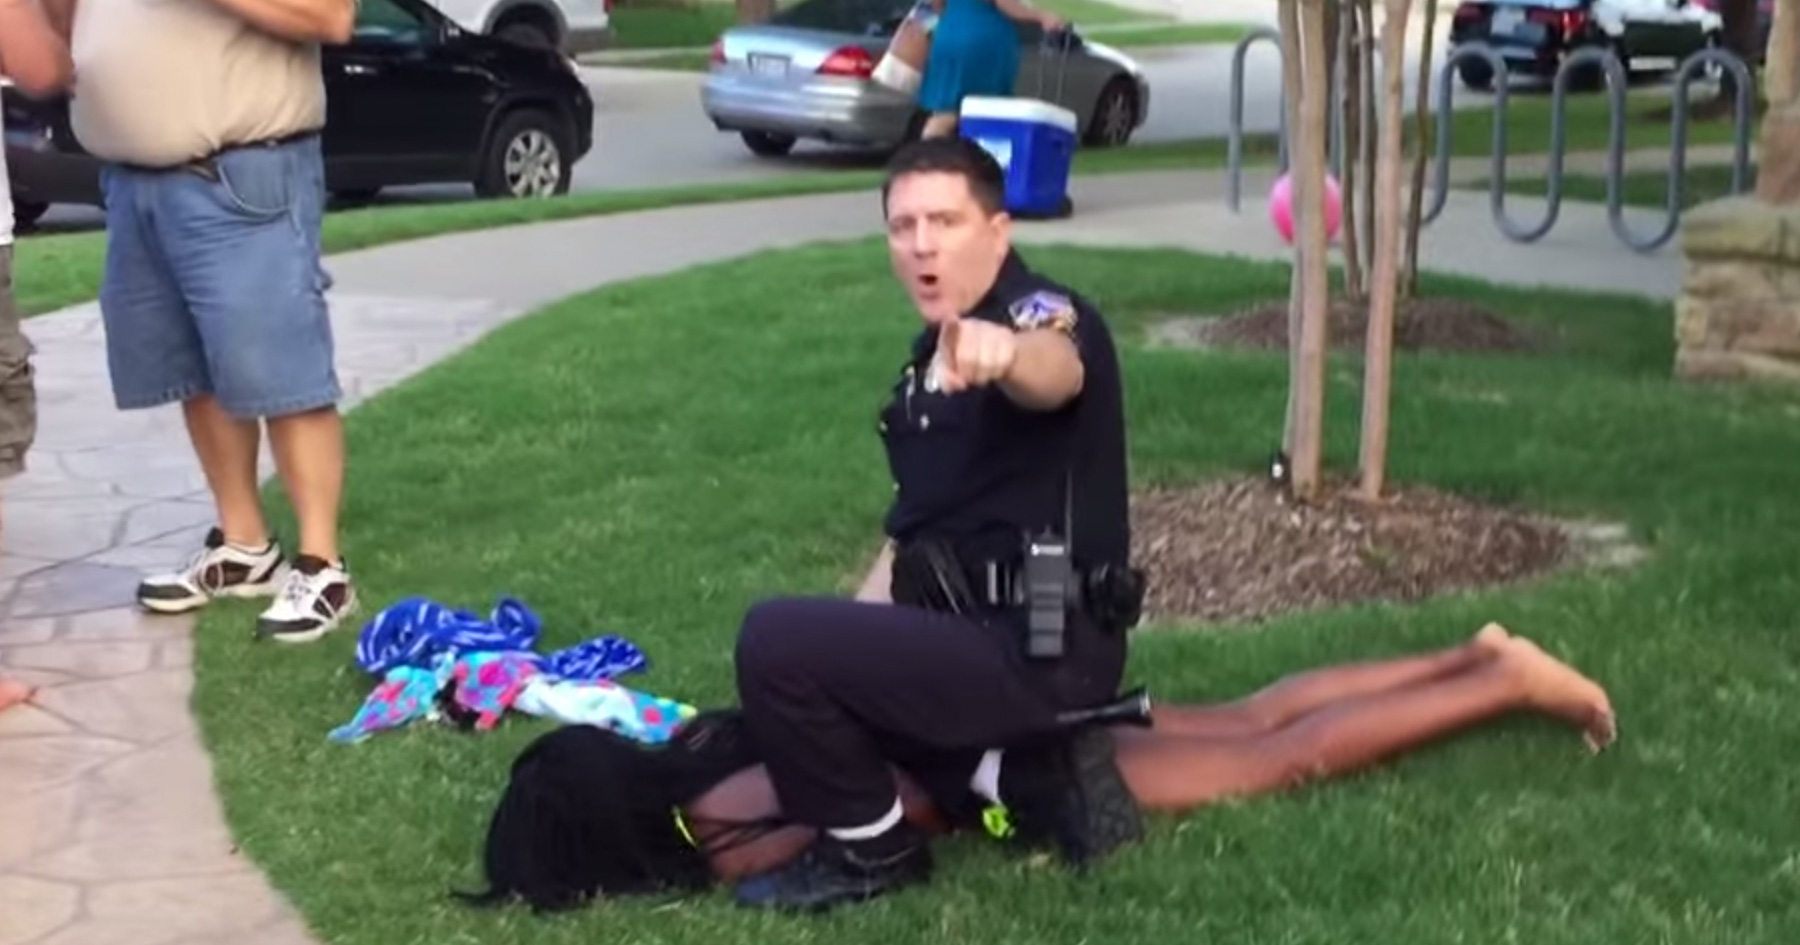 McKinney Police on video breaking up pool party